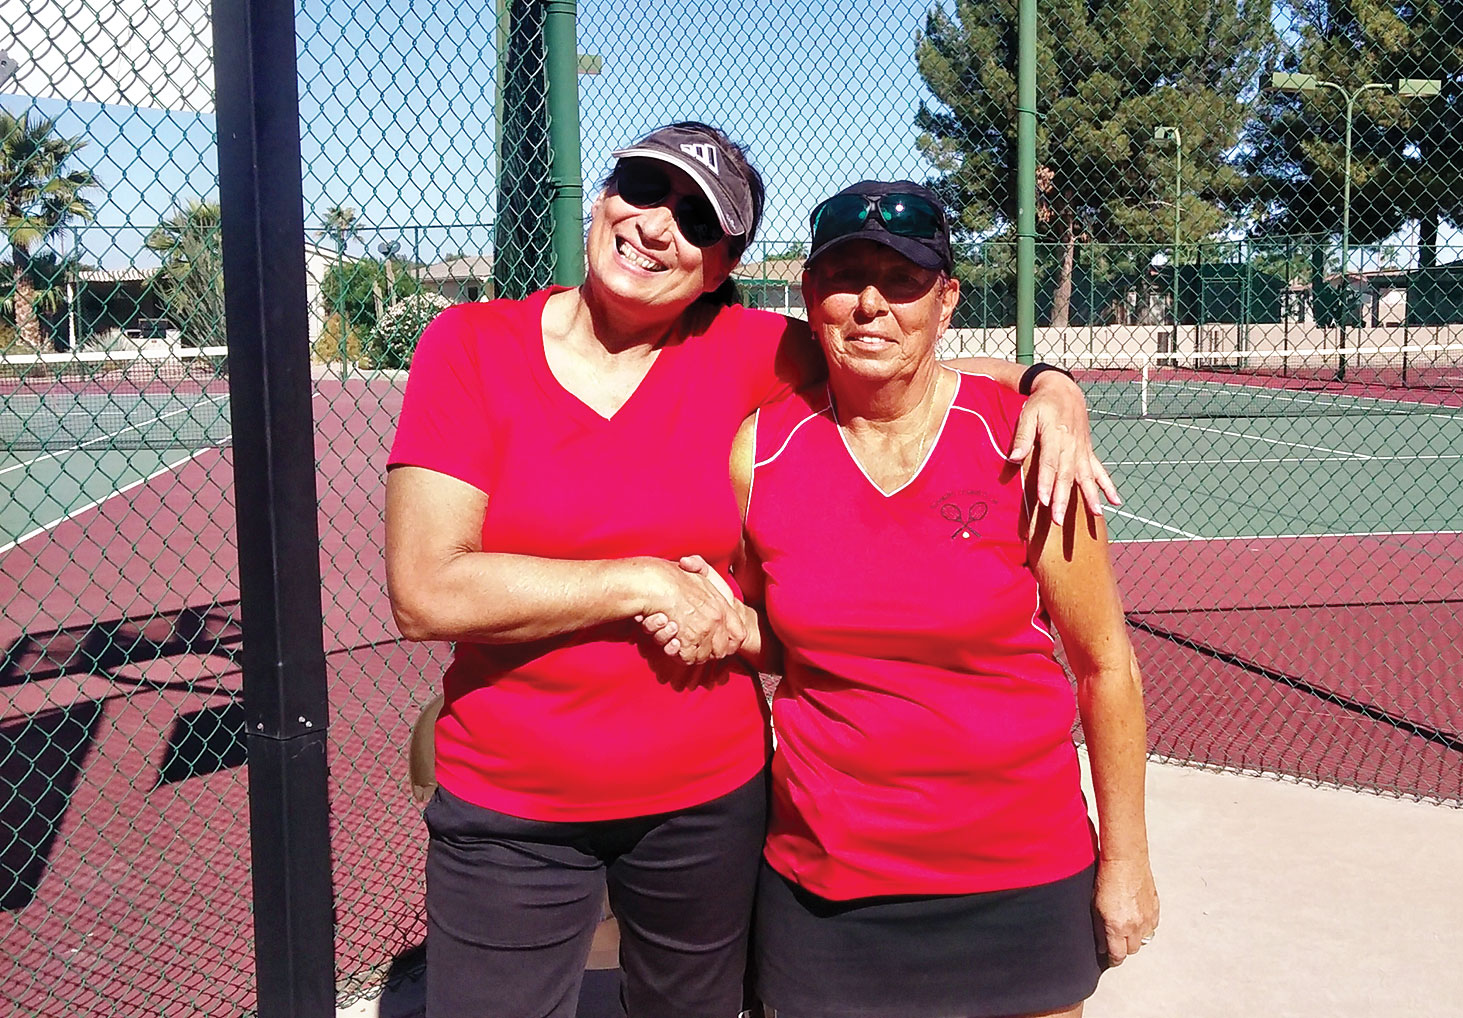 The members with the most wins in the in-house tournament were Teri Bitler (left) and Charlotte Wiard (right).